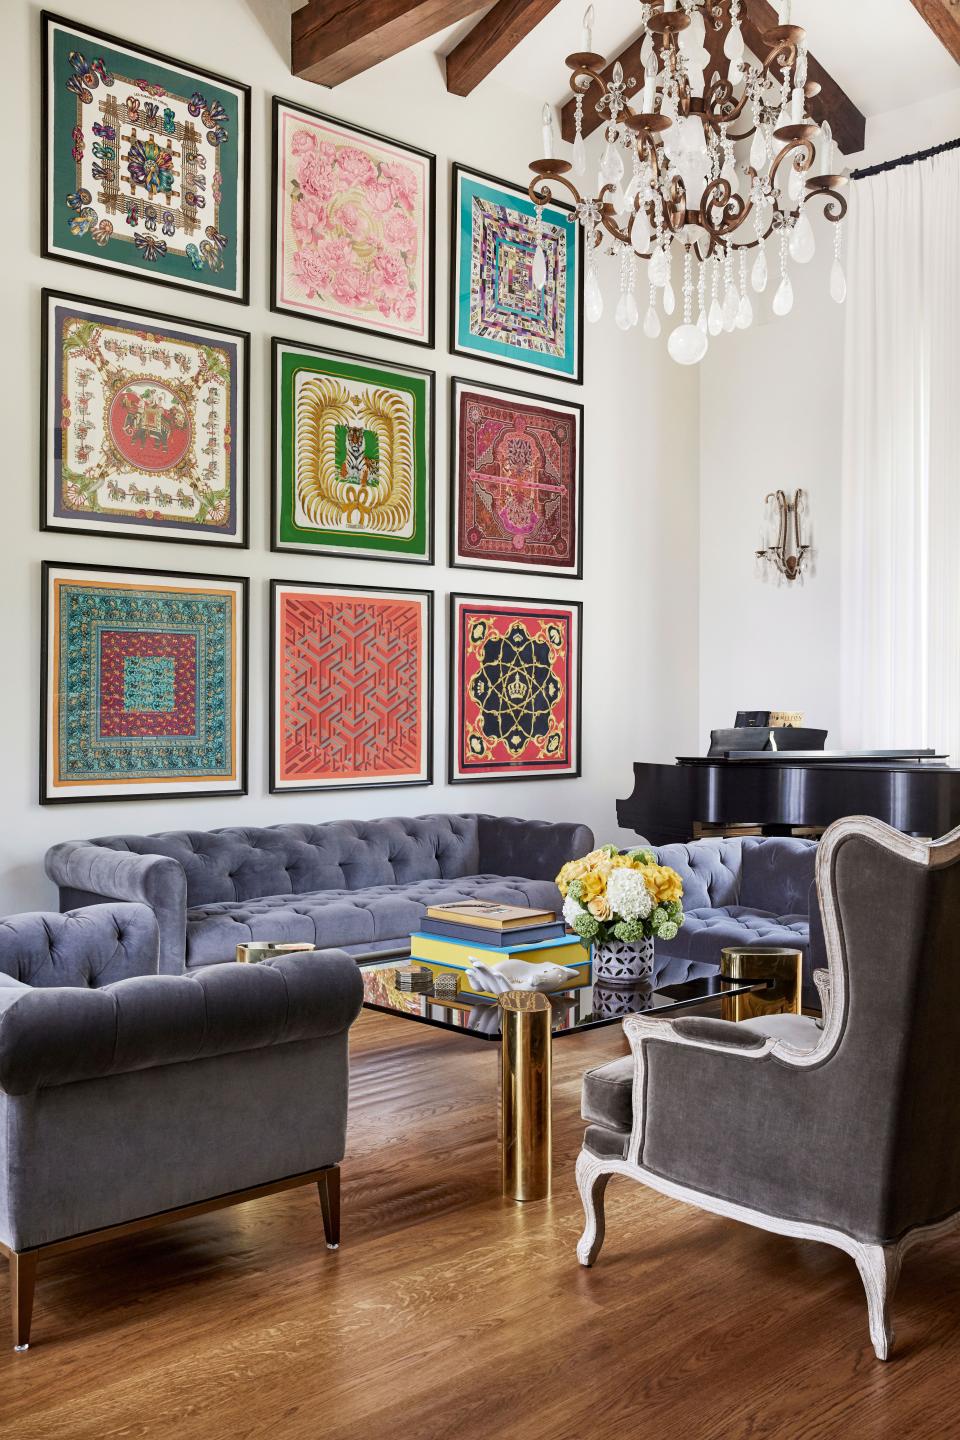 Designer Reza Farahan utilized the living room’s substantial height by positioning a grid of nine vintage Hermès scarves above the RH couch. The coffee table is a vintage Karl Springer made out of brass and smoked glass. Farahan custom-designed the rock crystal chandelier and sconces.